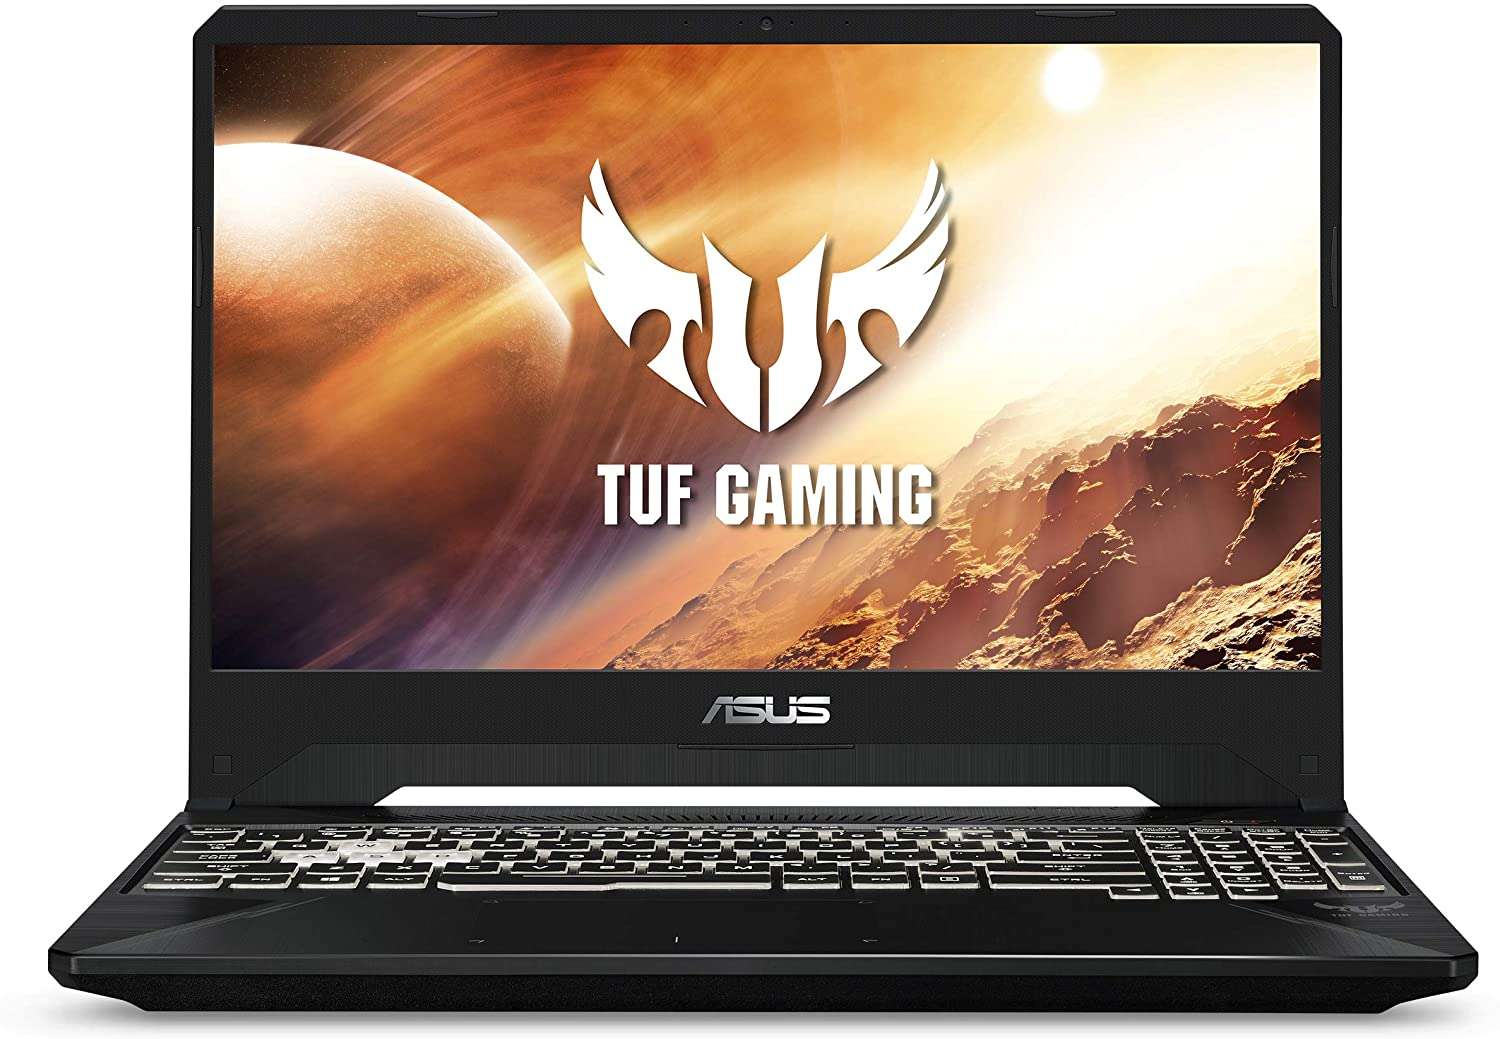 ASUS FX504 TUF Gaming Laptop Best Affordable Laptop For Camming